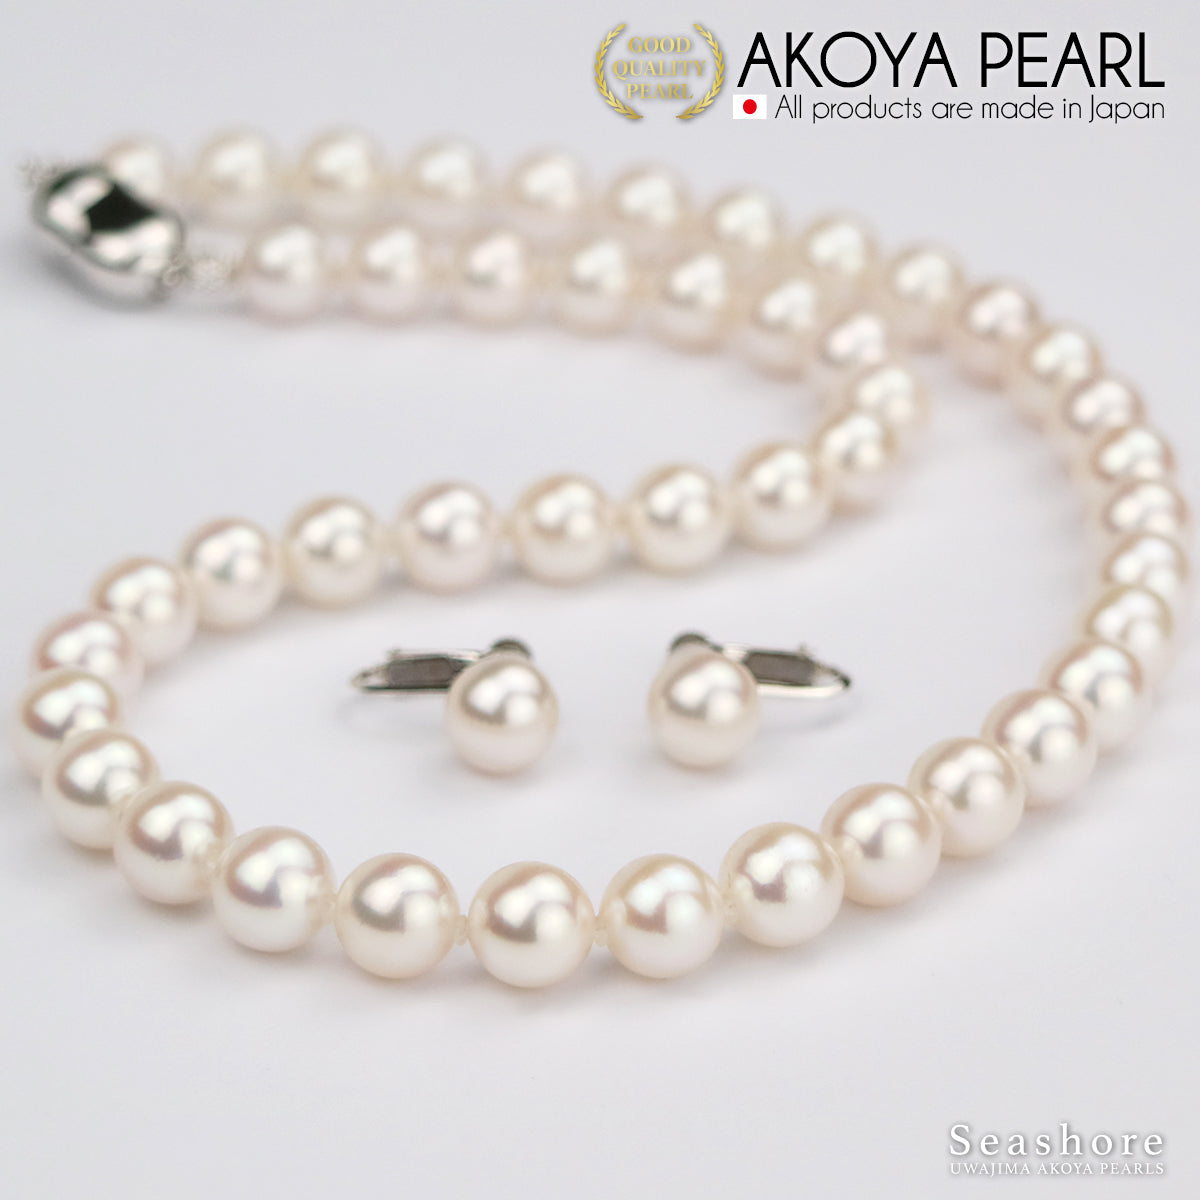 Hanadama Pearl Formal Necklace 2 Piece Set Large Beads [8.5-9.0mm] (Earrings Included) Formal Set Certificate of Authenticity Storage Case Included Ceremonies